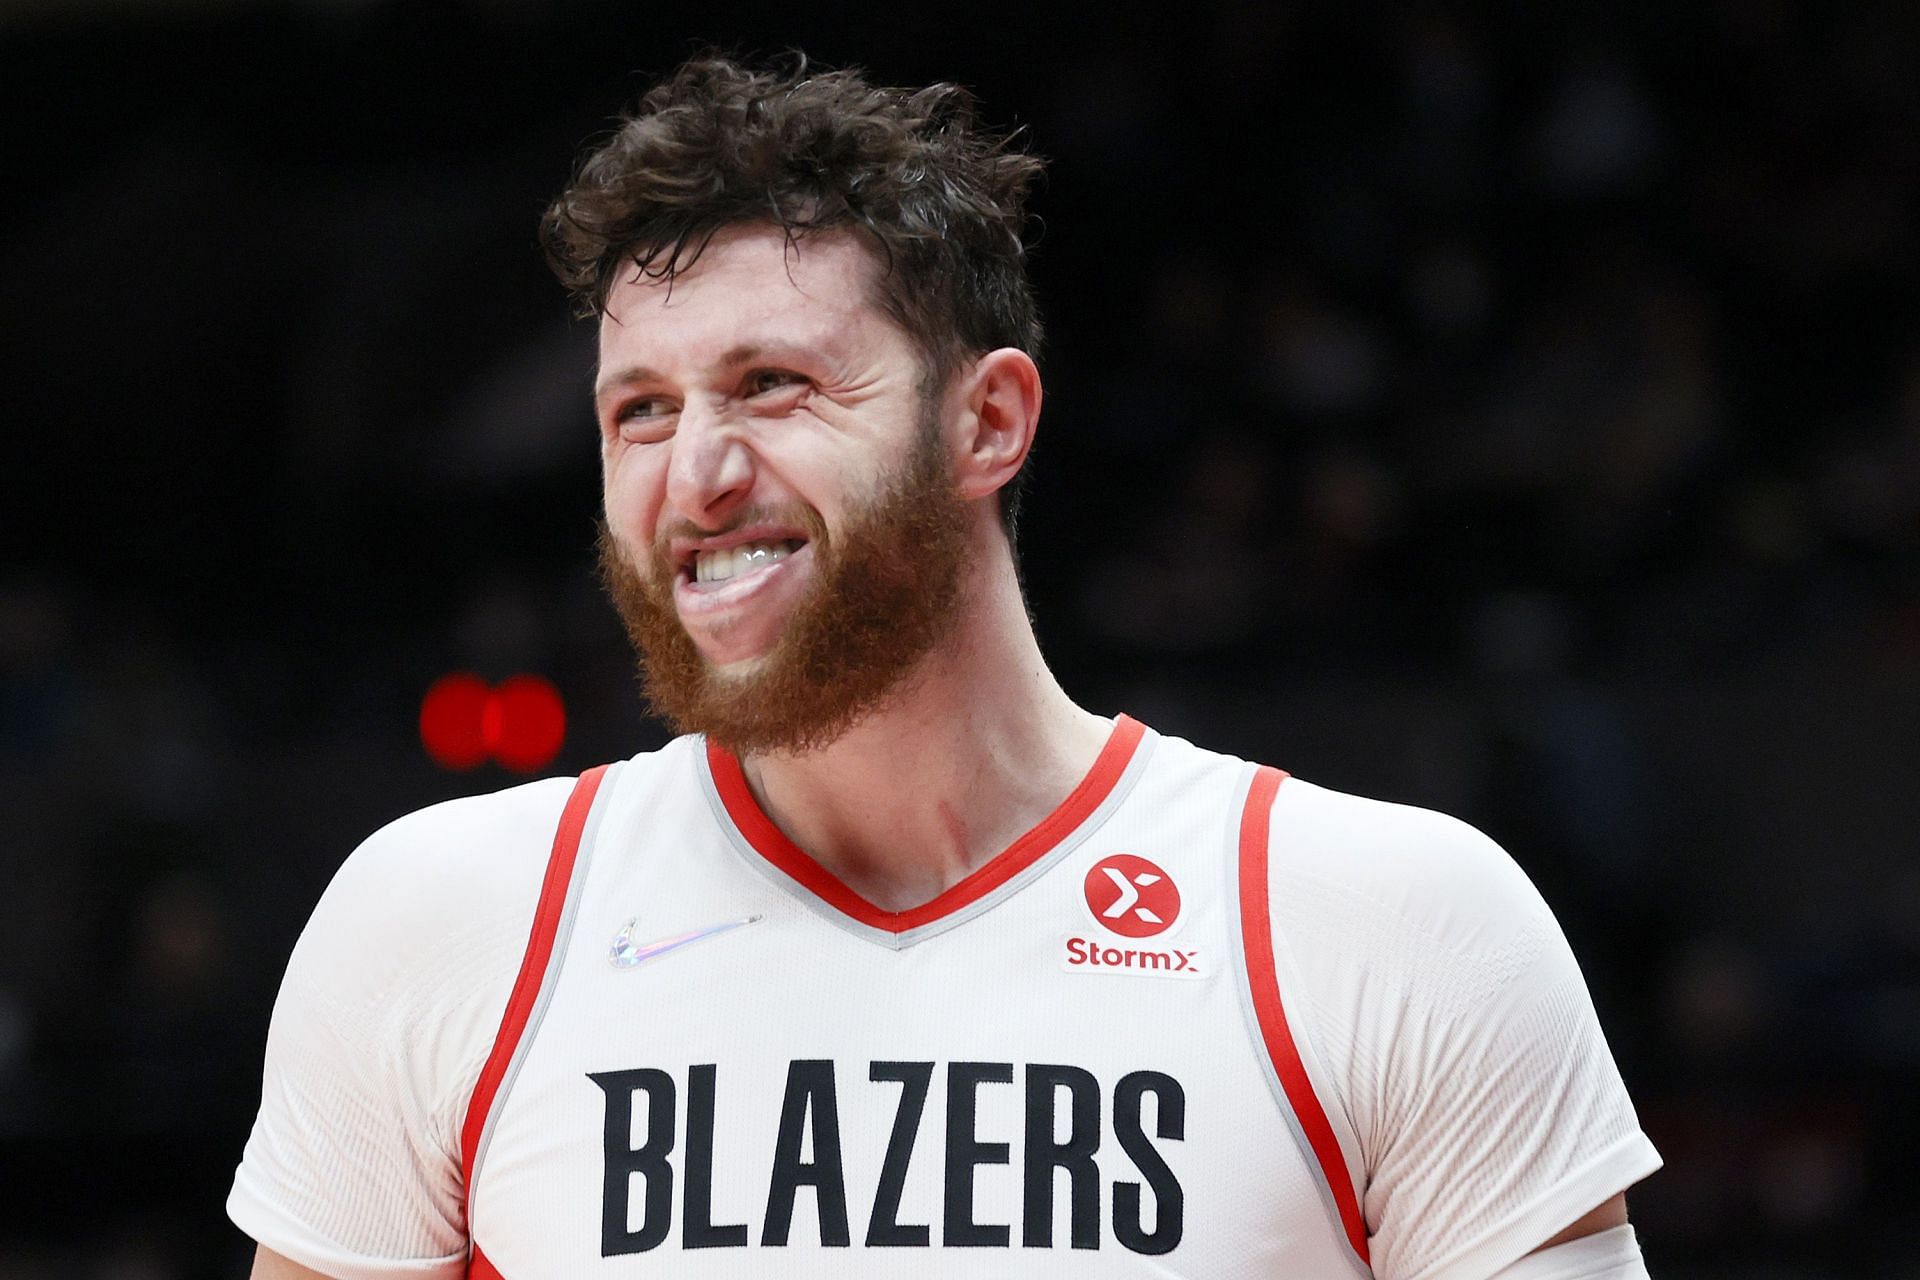 Jusuf Nurkic is currently sidelined for four weeks due to plantar fasciitis in his left foot